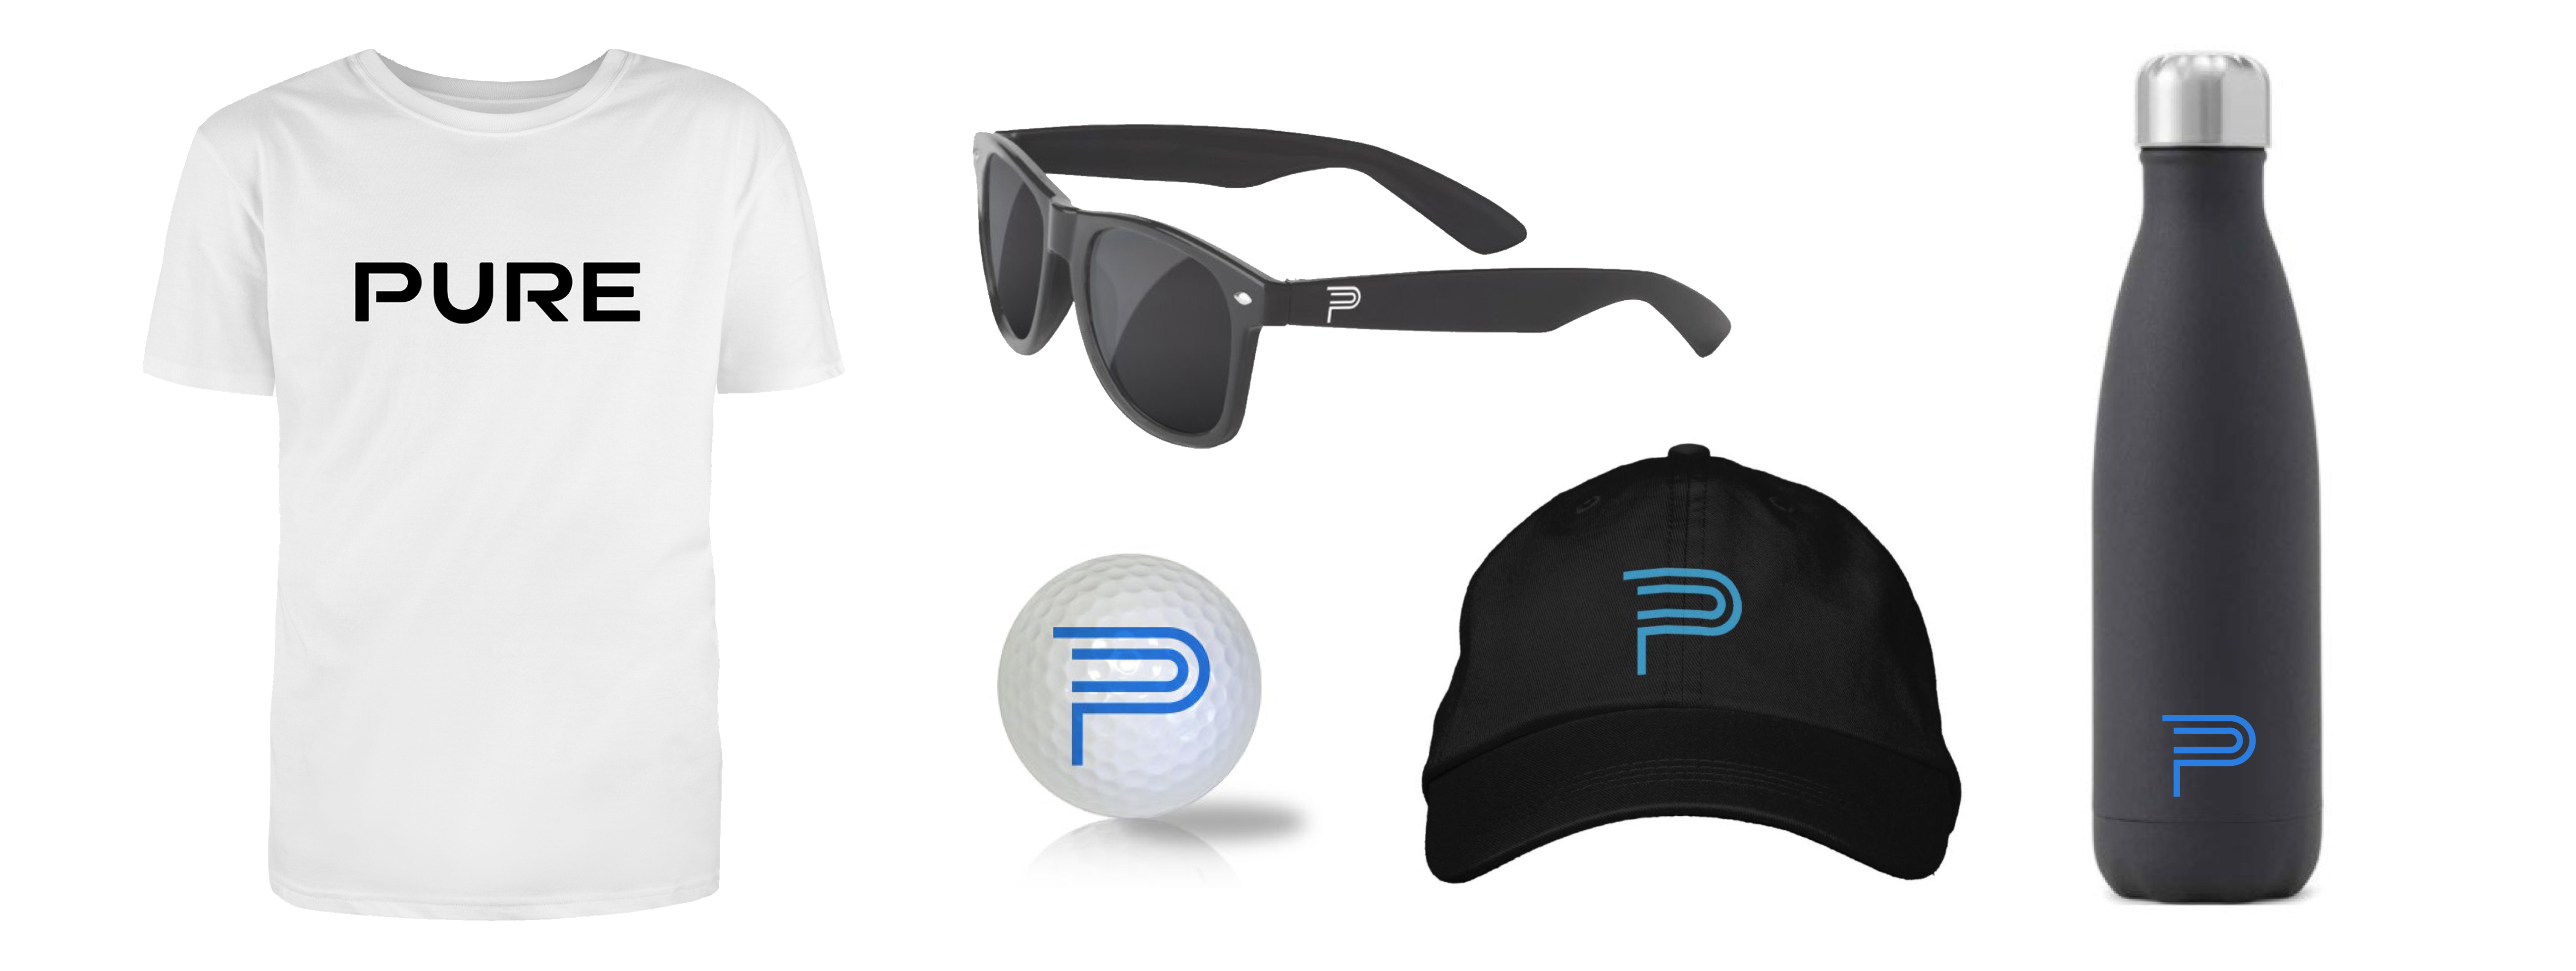 Pure Industrial Promotional Designs: TShirt, Cap, Water Bottle, Sunglasses and Golf Ball